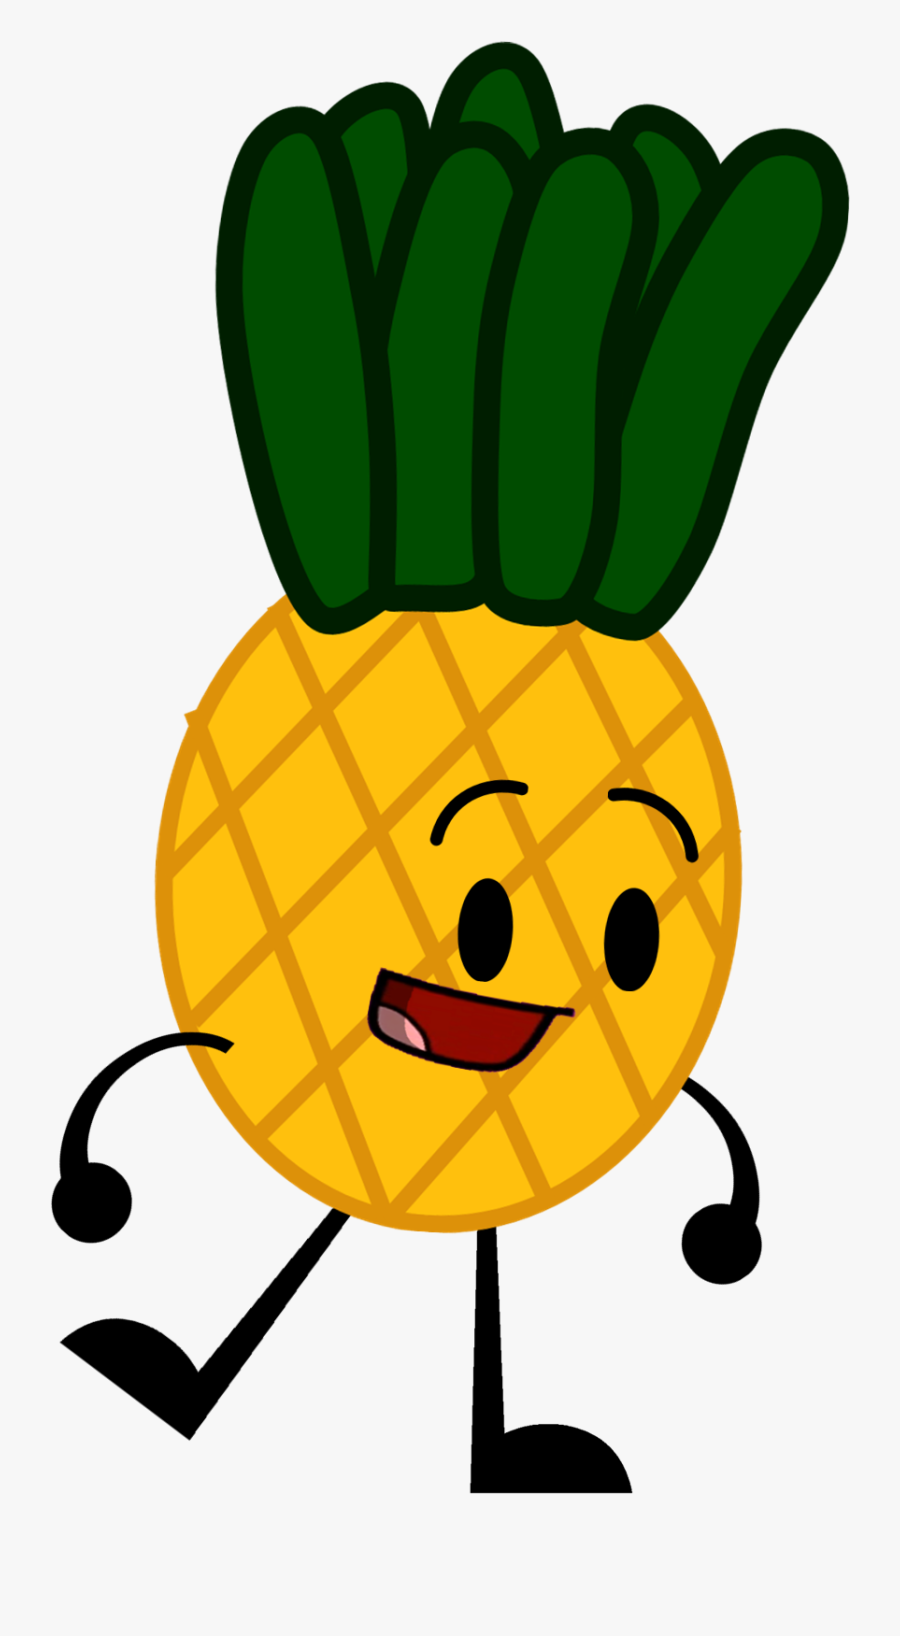 Pineapple Clipart Object - Battle For Dream Island Pineapple, Transparent Clipart